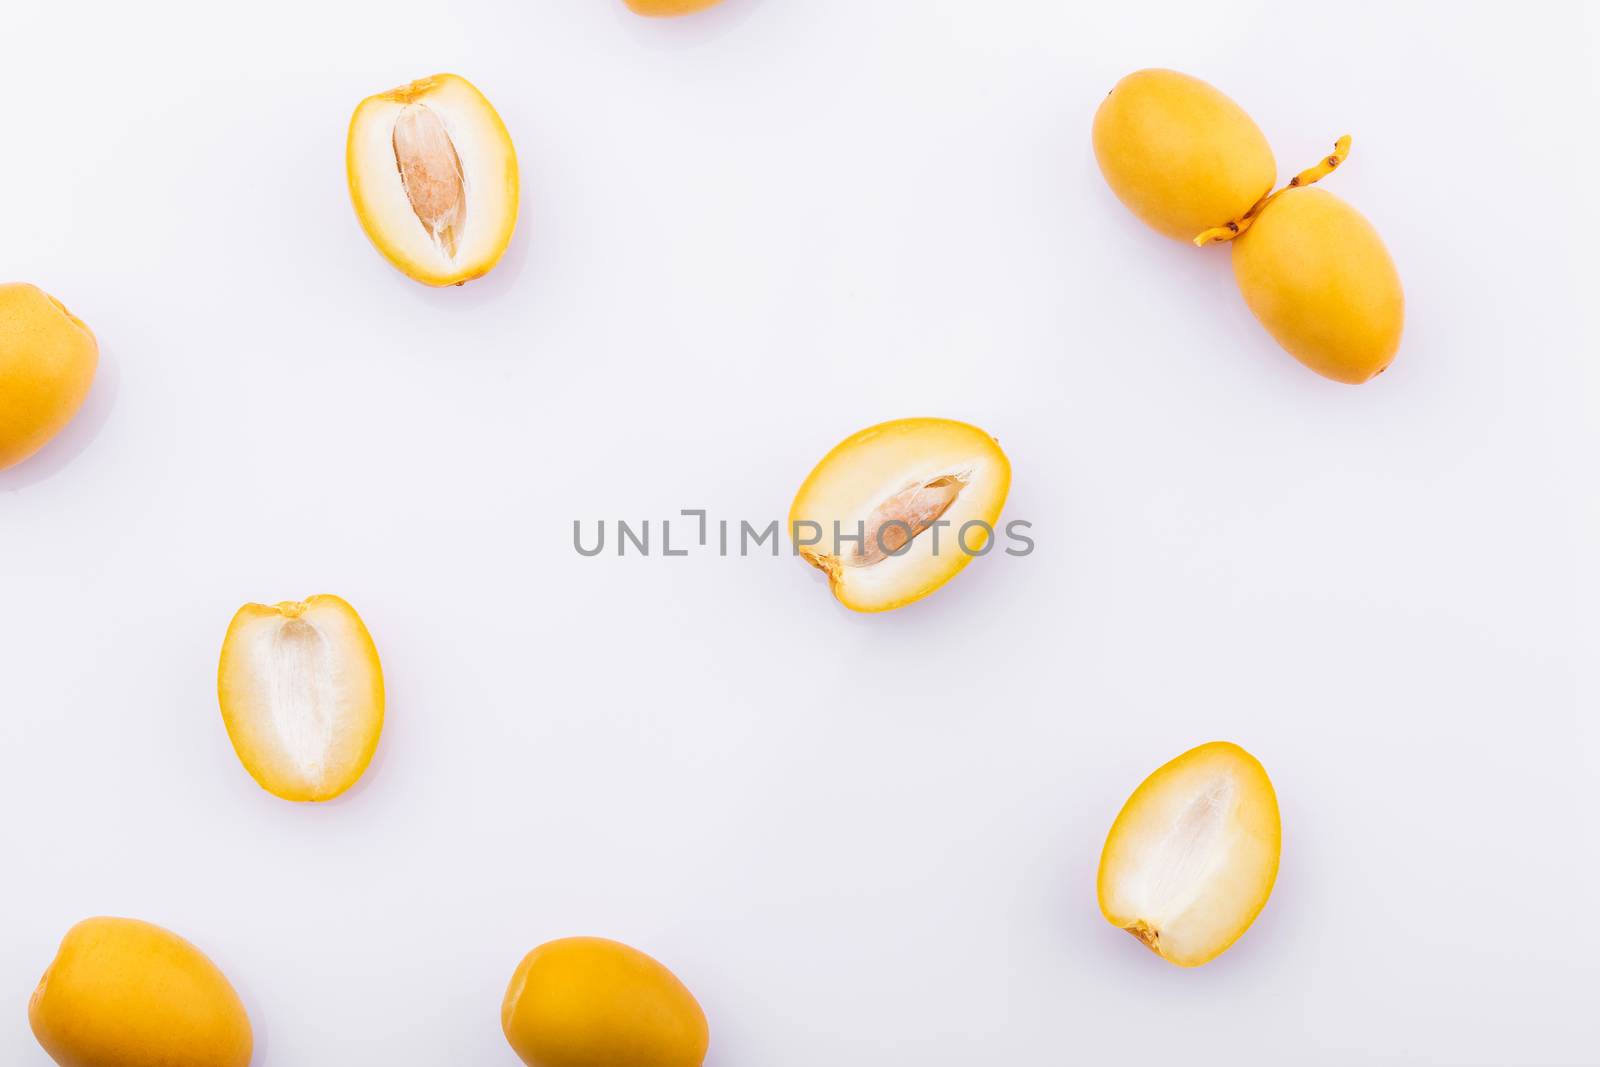 yellow date palm fruit on white background